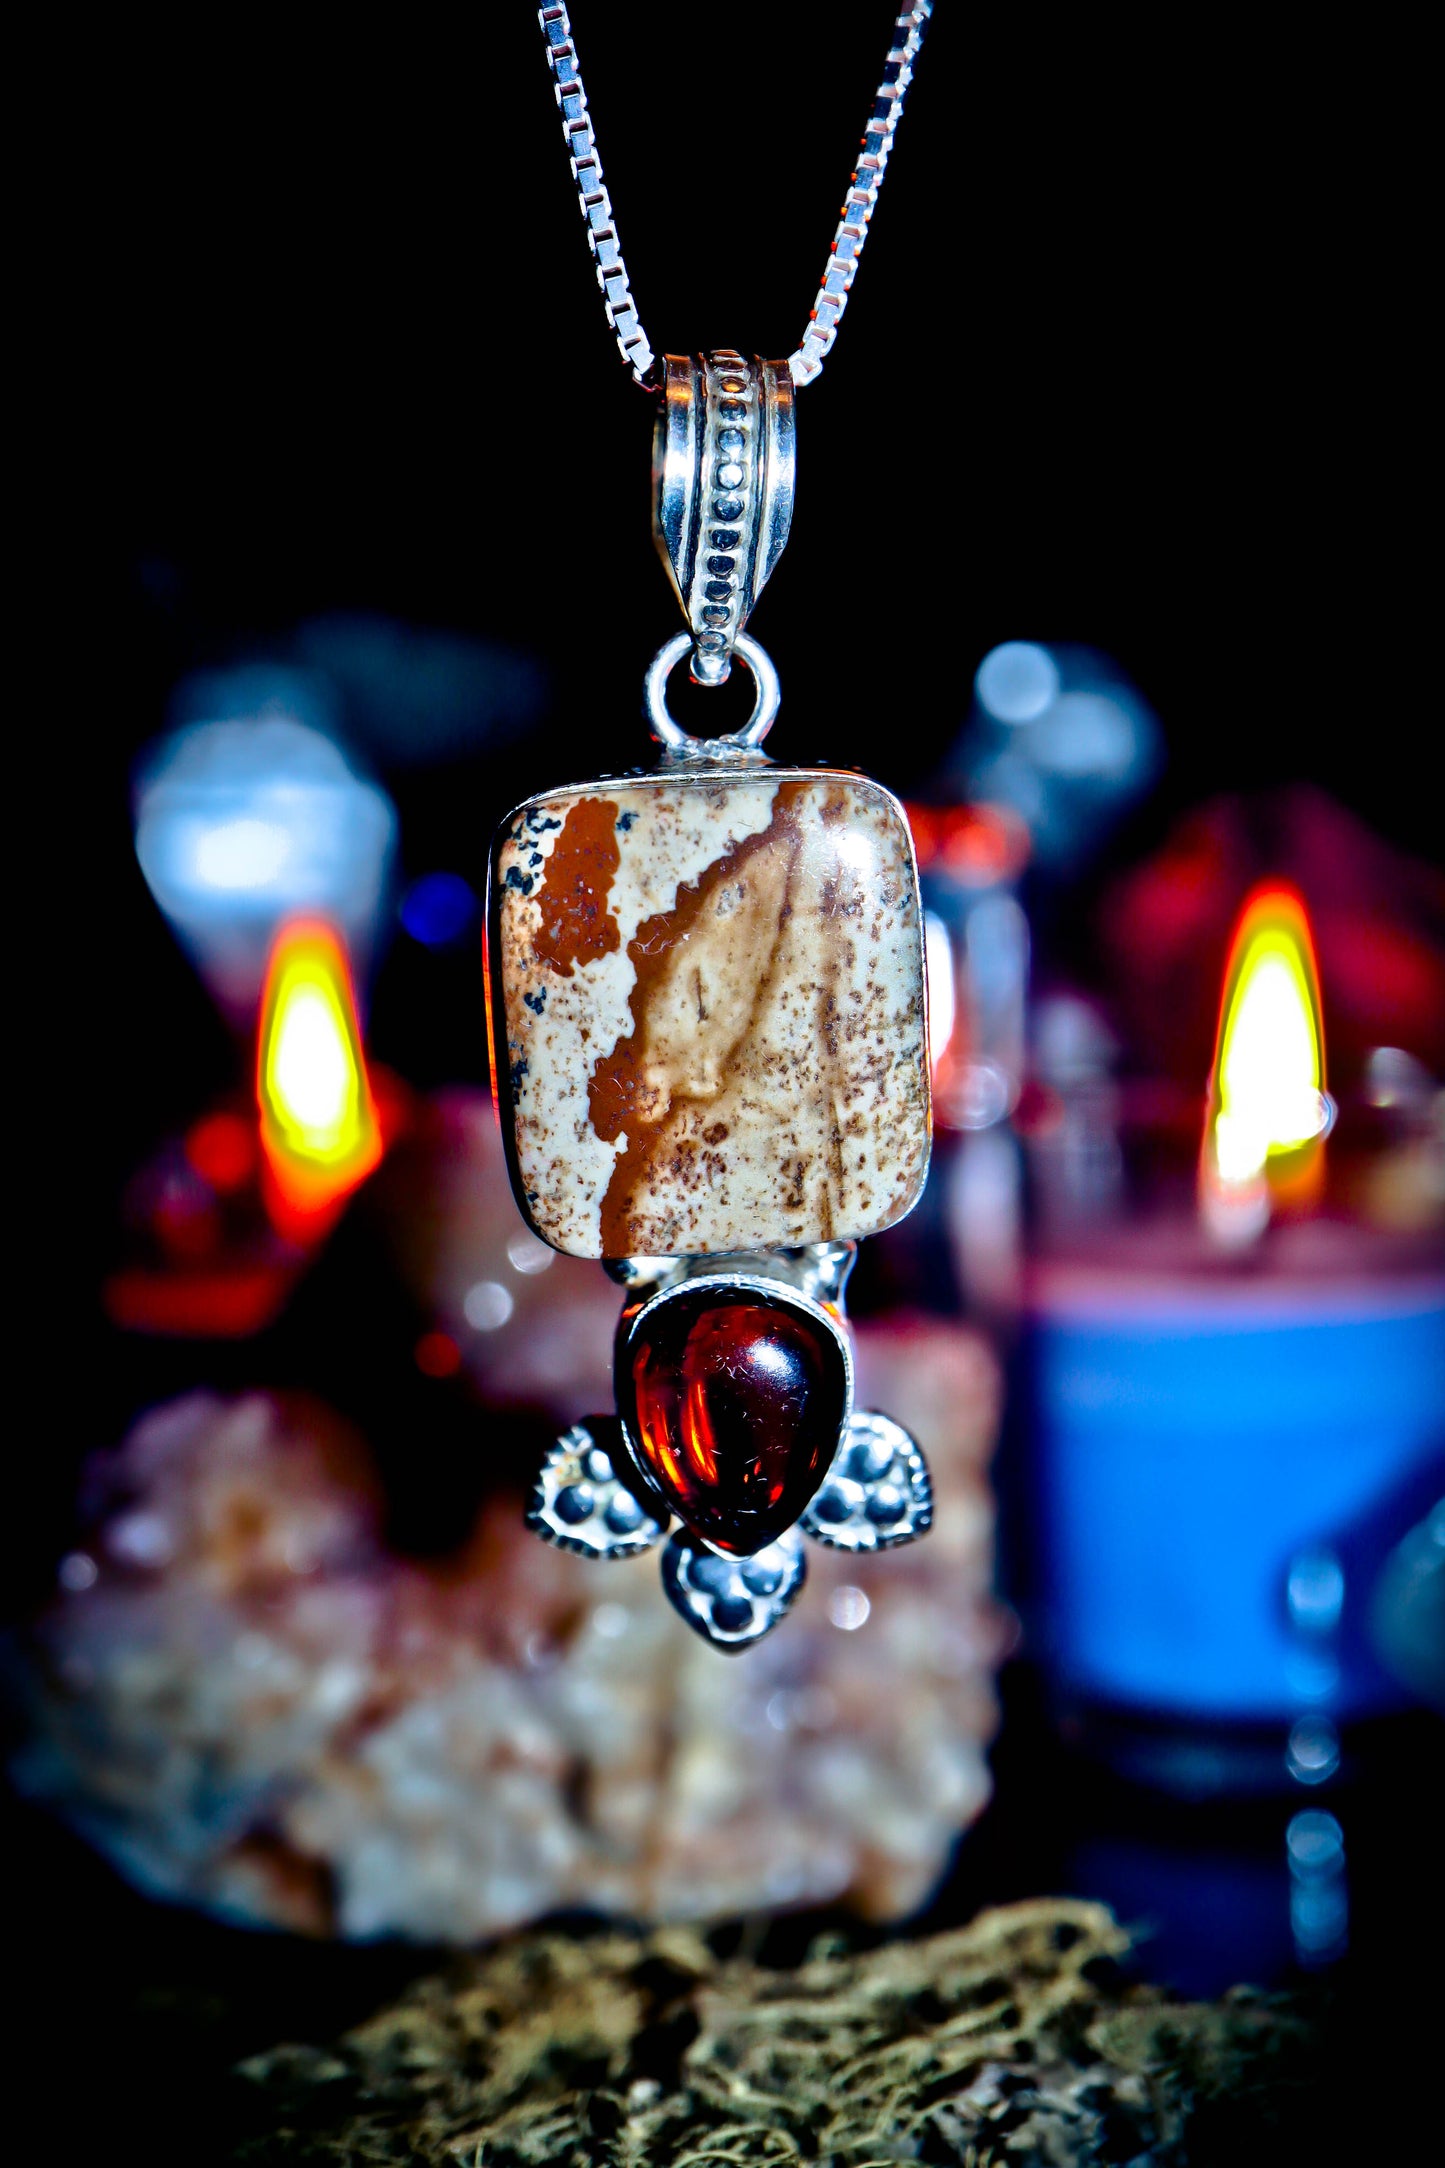 ** MAGICK ** SHAPESHIFTING Metamorphosis Genie Amulet! Change Your Shape! Ancient Occult Rituals & Transformation Spells! $$$ Powerful Haunted Djinn Vessel! * Sterling Silver!